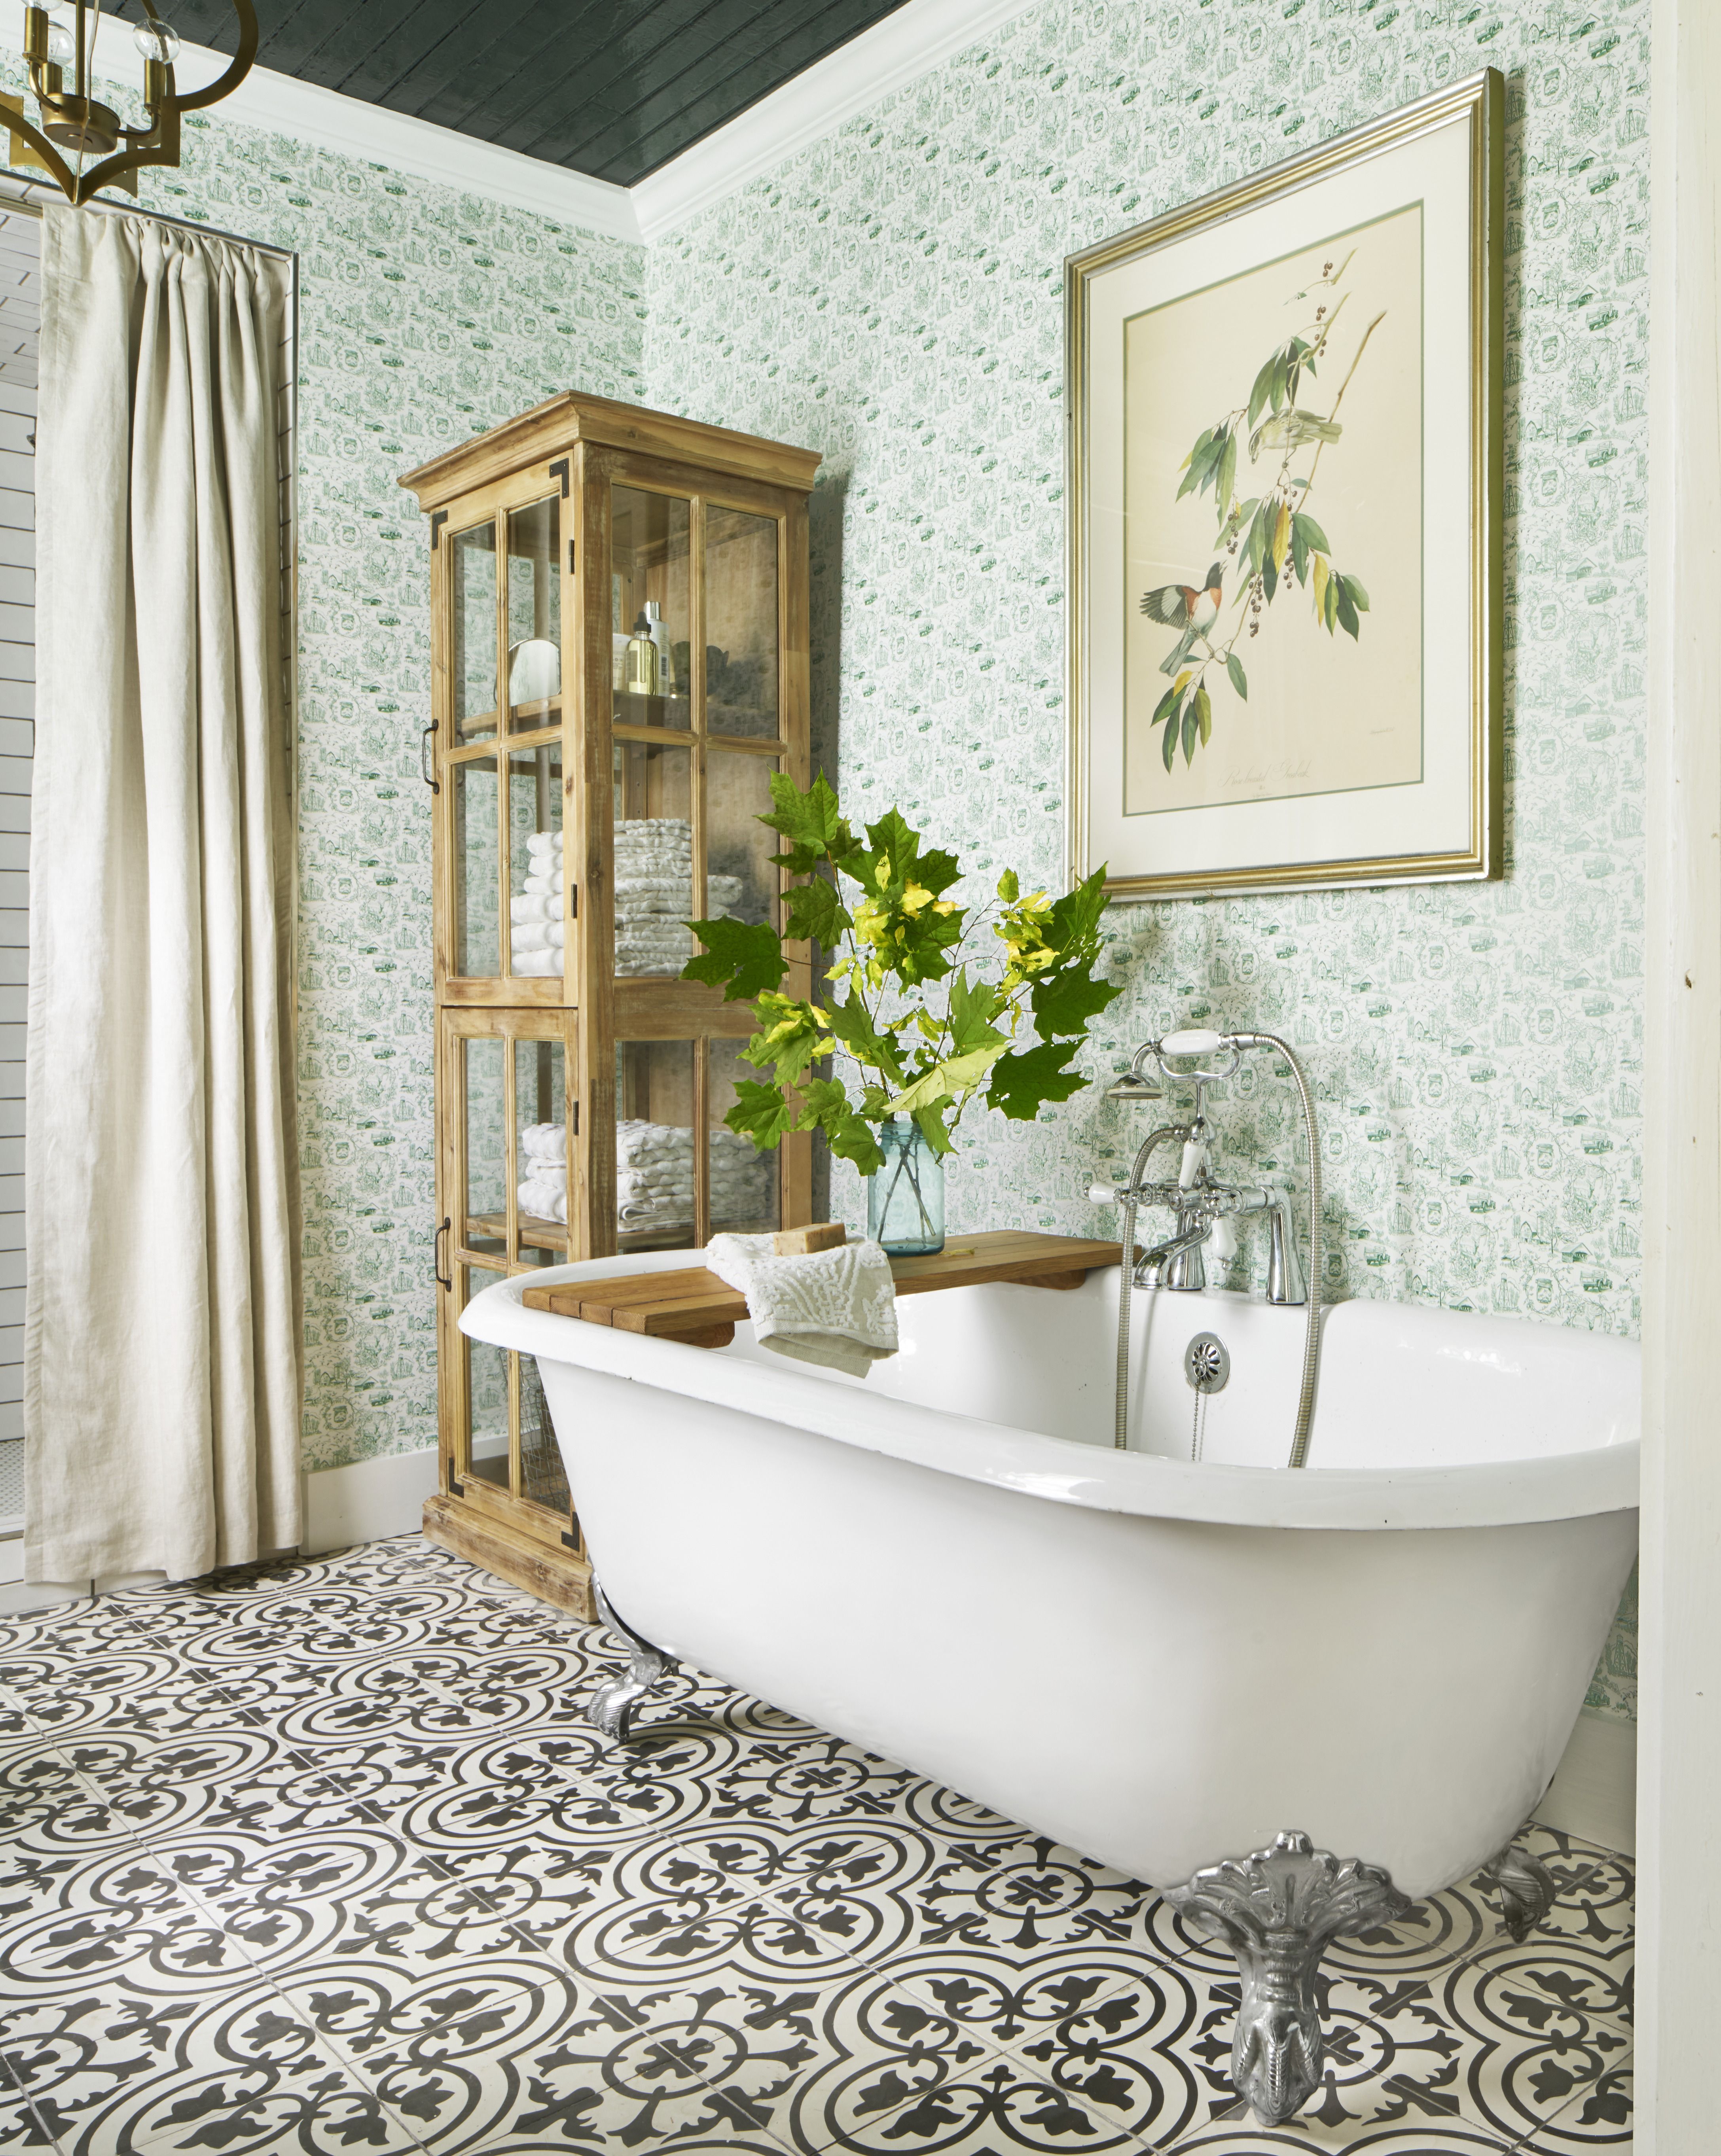 15 Bathroom Wallpaper Designs to Create a Colorful Space